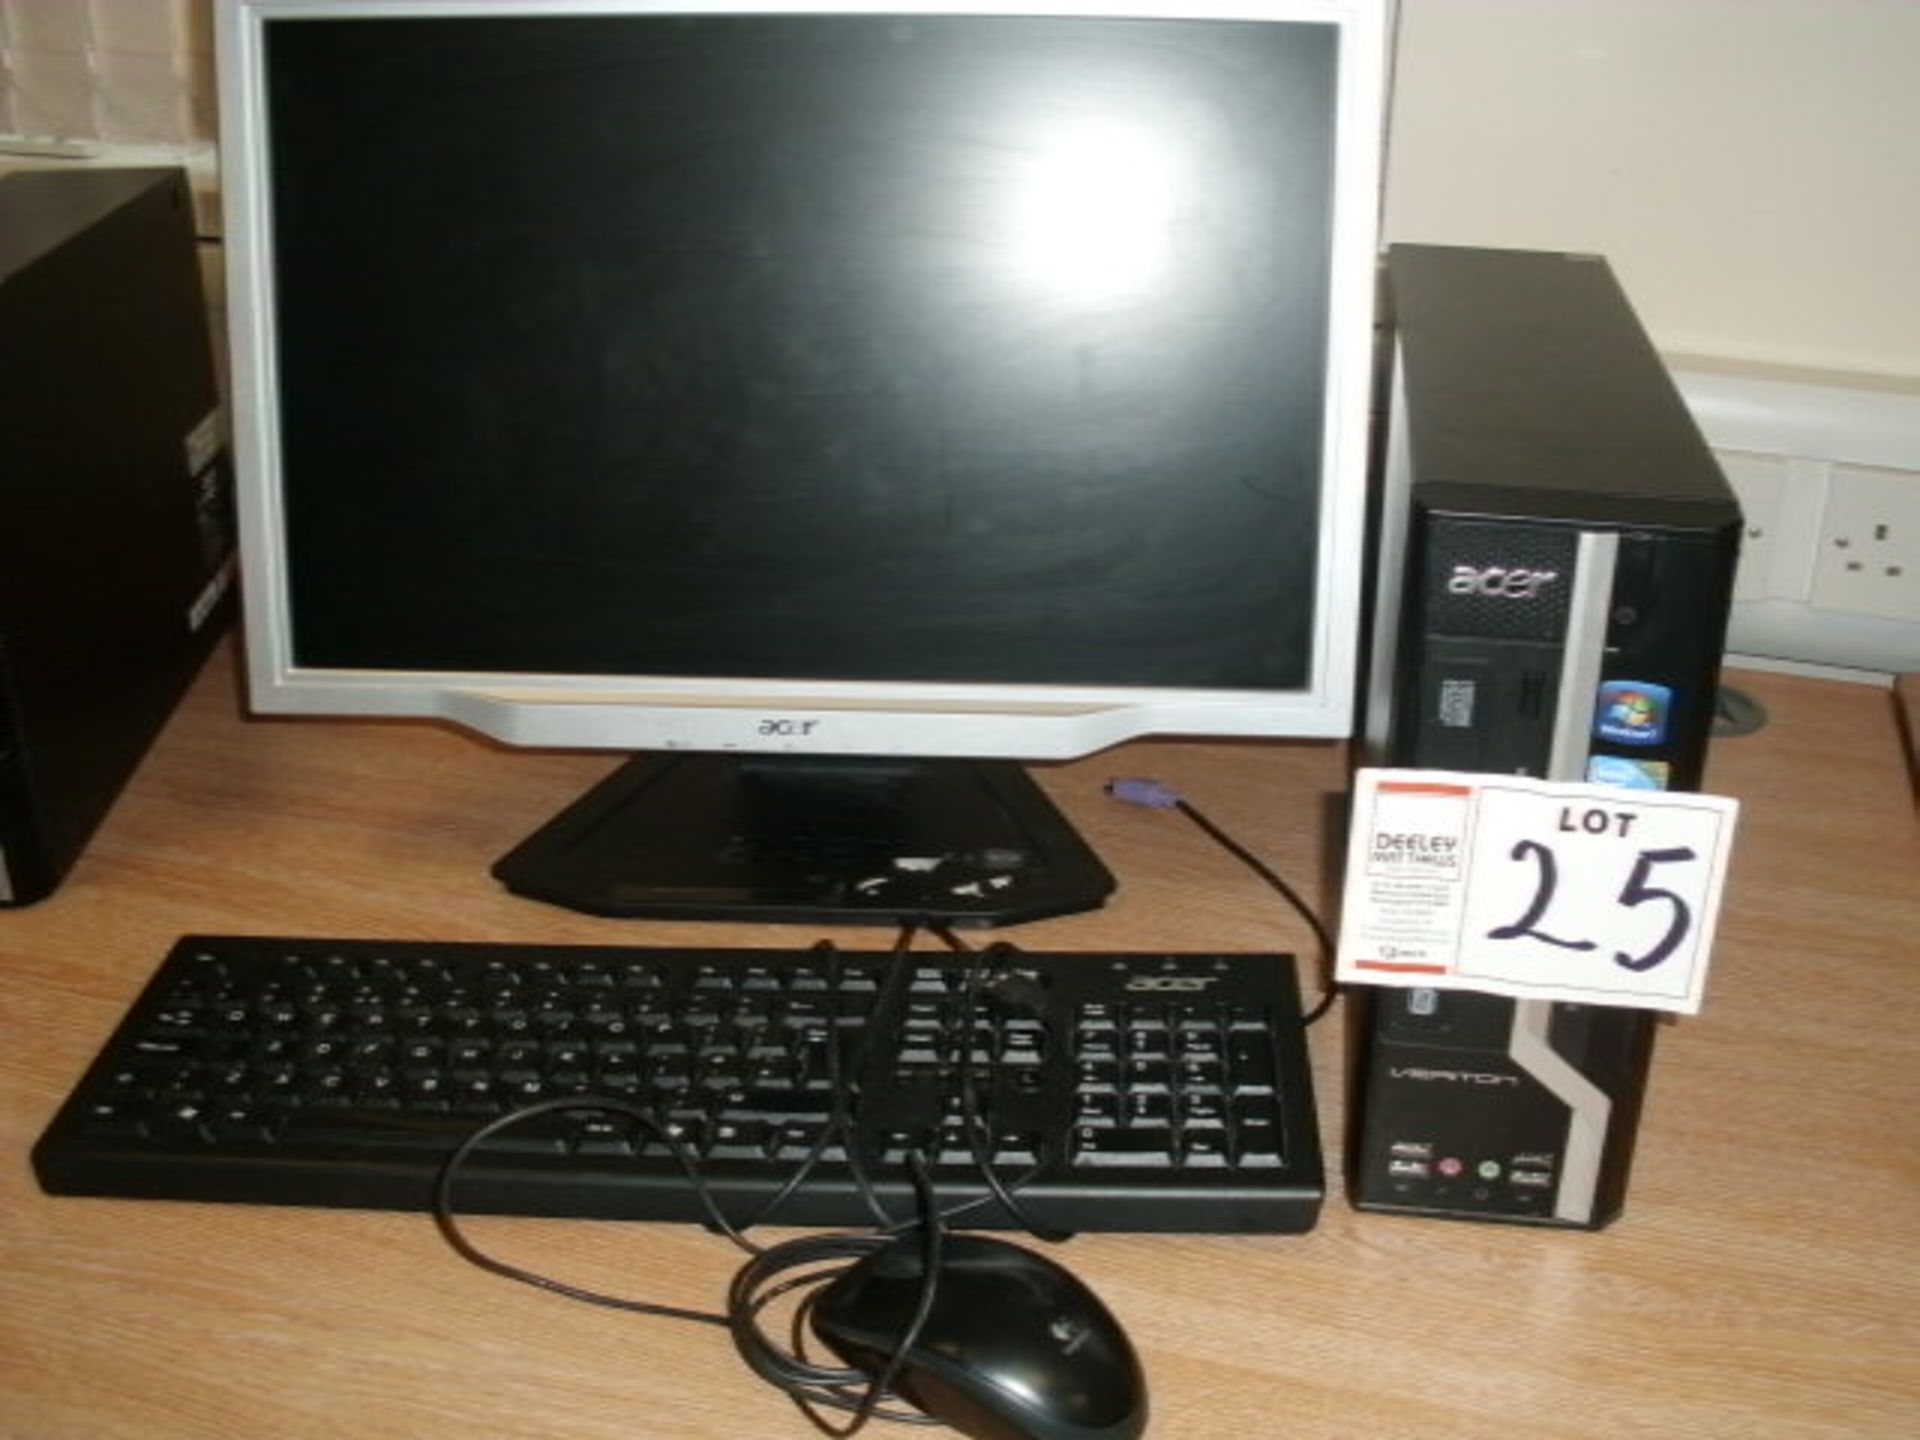 Acer Veriton X840G PERSONAL COMPUTER with 20" flat screen monitor, keyboard and mouse